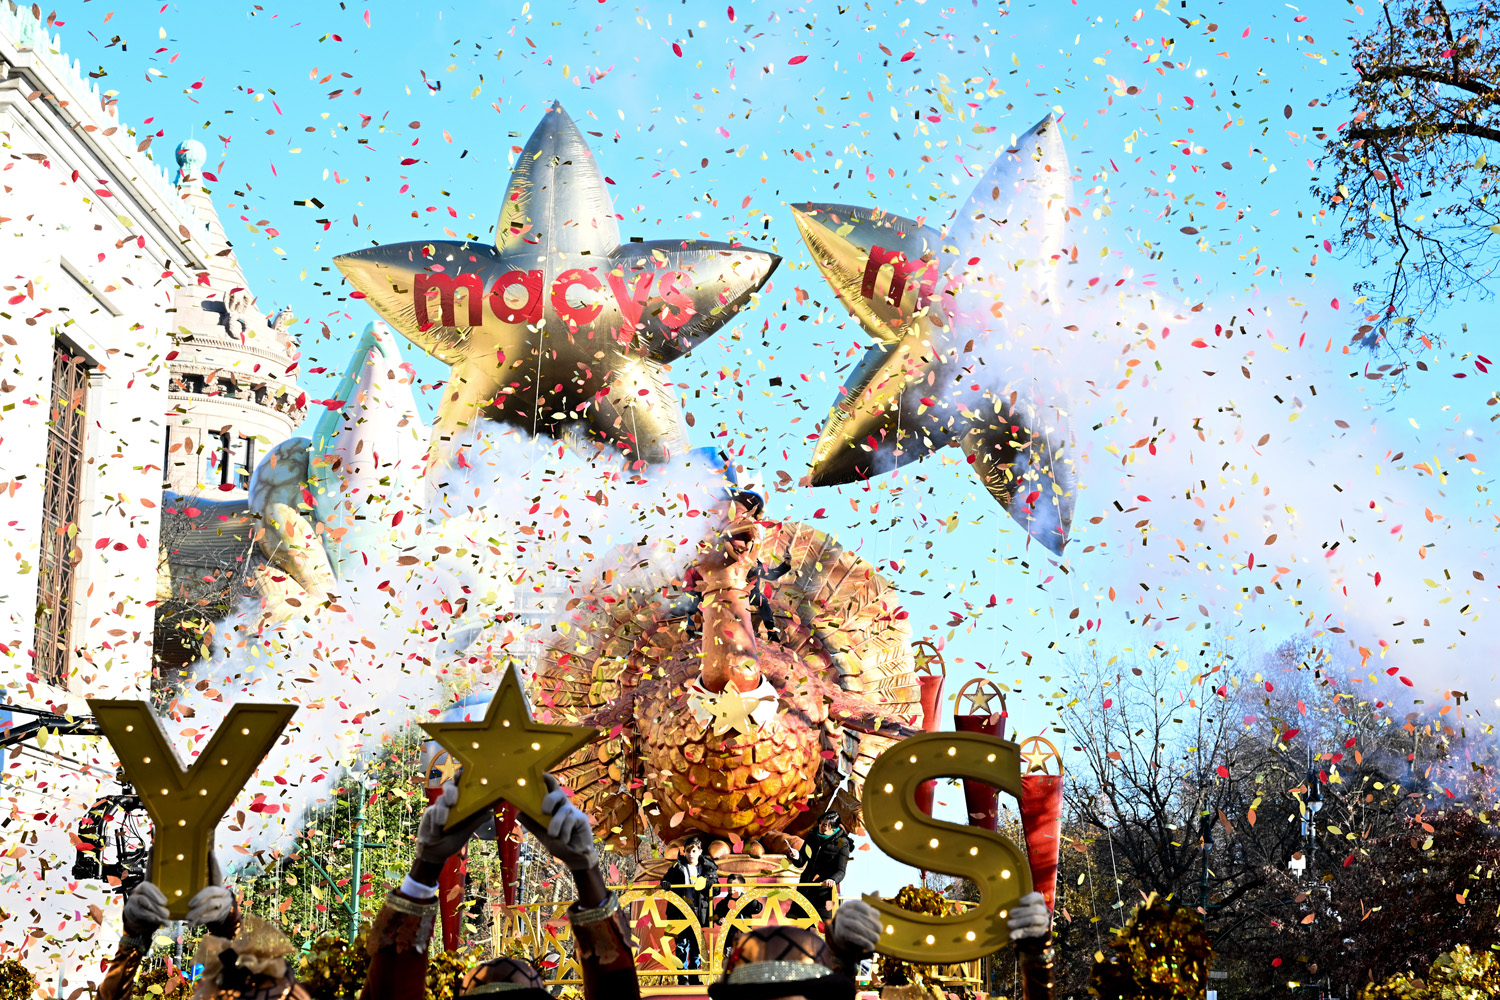 Dancers cut the ribbon at the start of the 96th-annual Macys Thanksgiving Day Parade